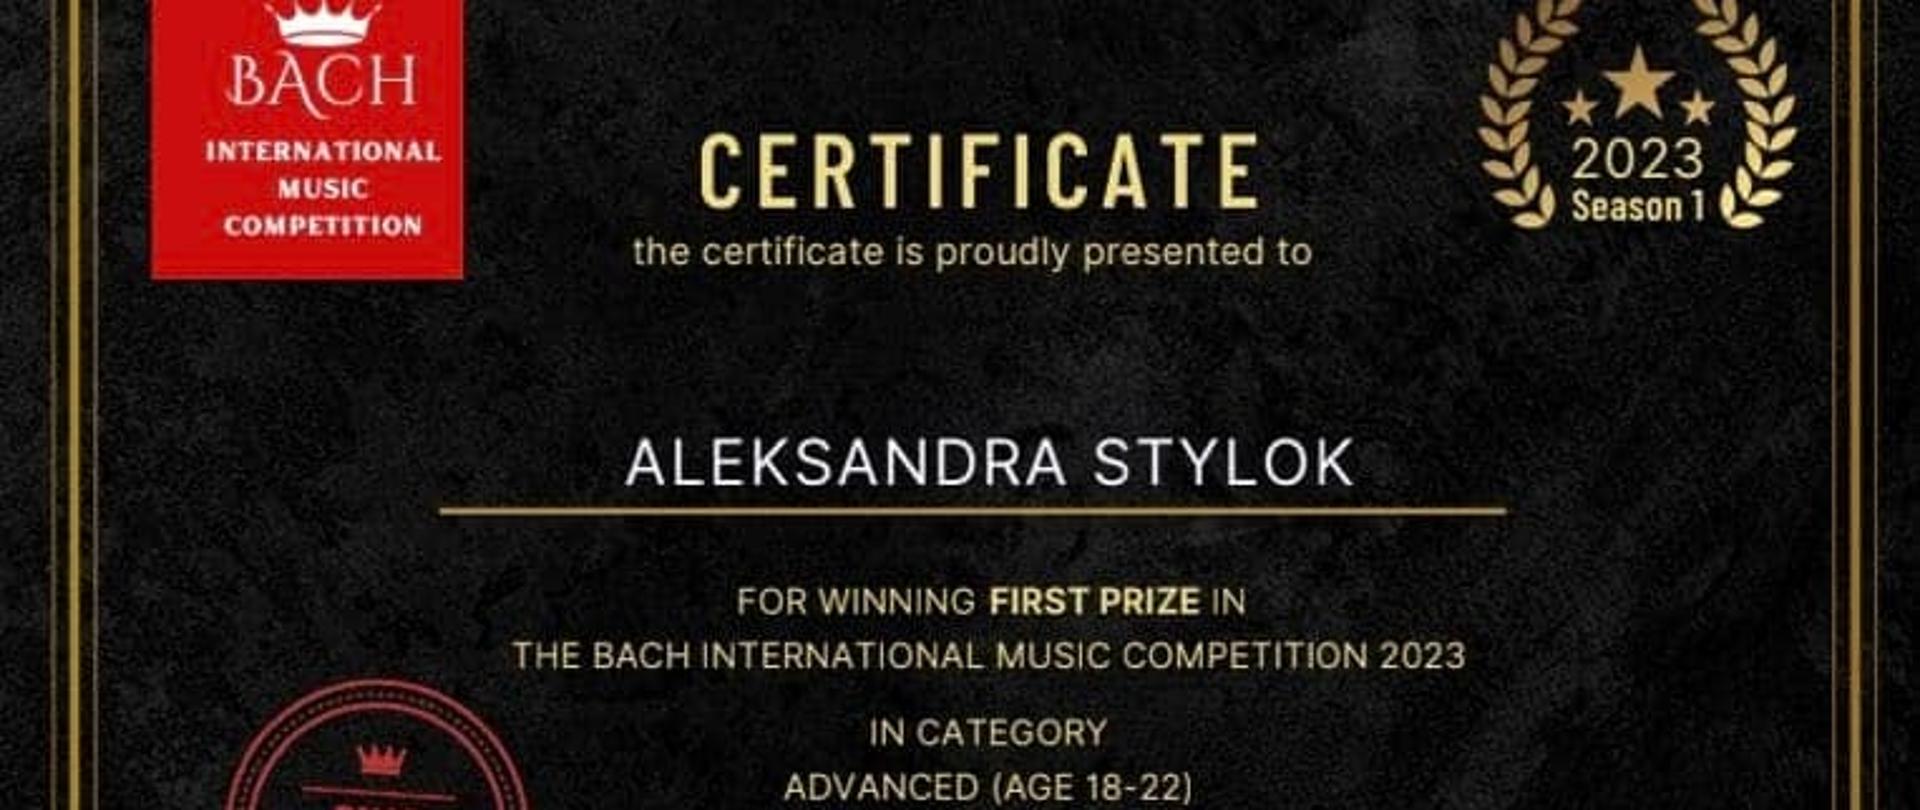 W górnym lewym rogu logo Bach International Music Competition. Certificate 2023 Season 1, the certificate is proudly presented to Aleksandra Stylok for winning first prize in The Bach International Music Competition 2023 in category advanced (age 18 - 22). Issue date 10.03.2023